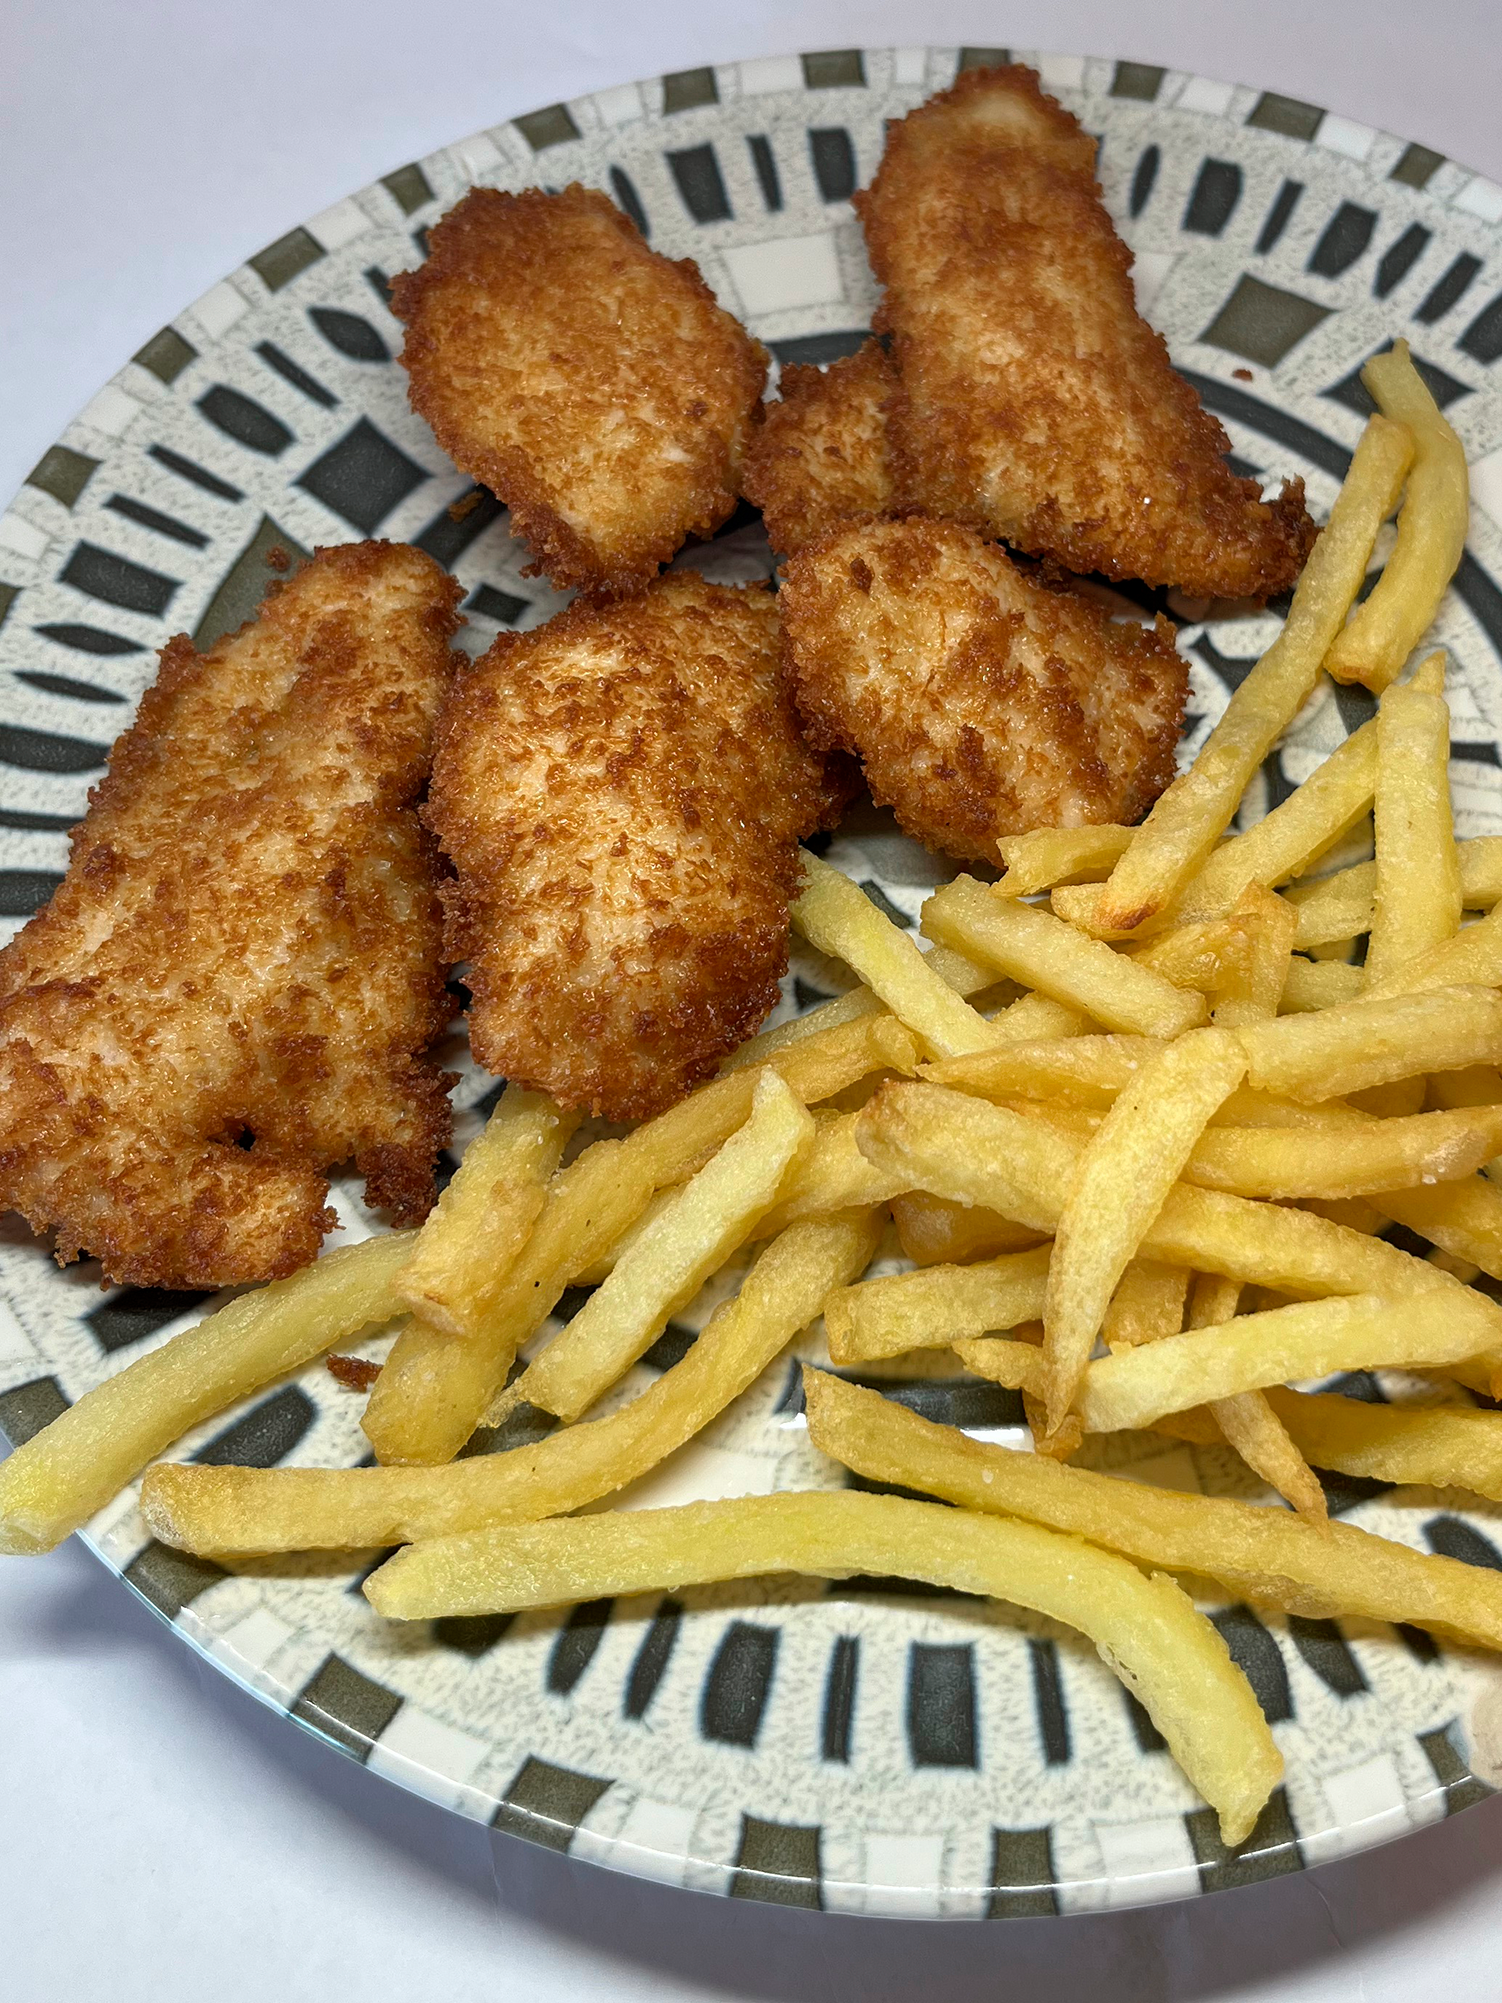 FRIED BREADED CHICKEN WITH POTATOS